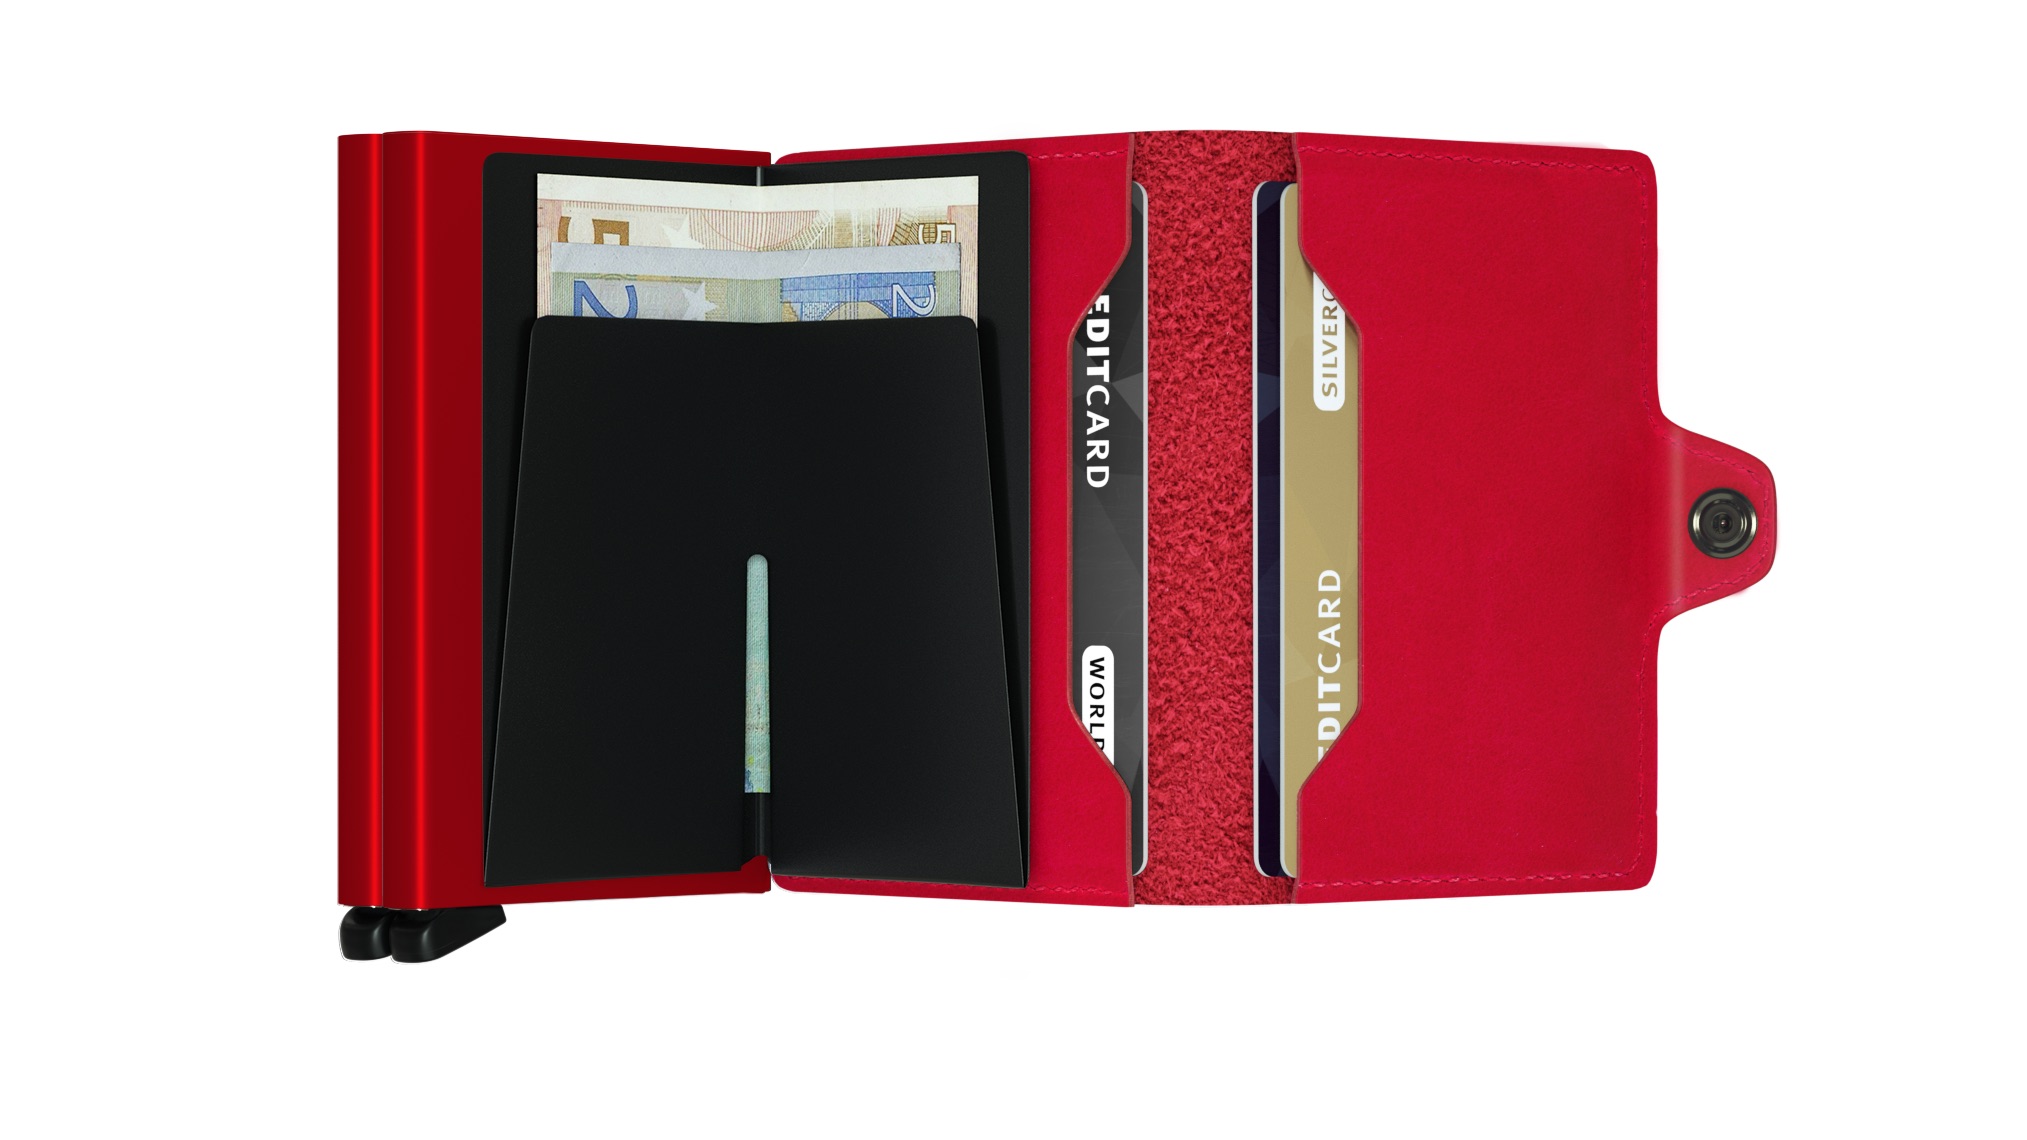 Secrid Twinwallet TO Original Red-Red